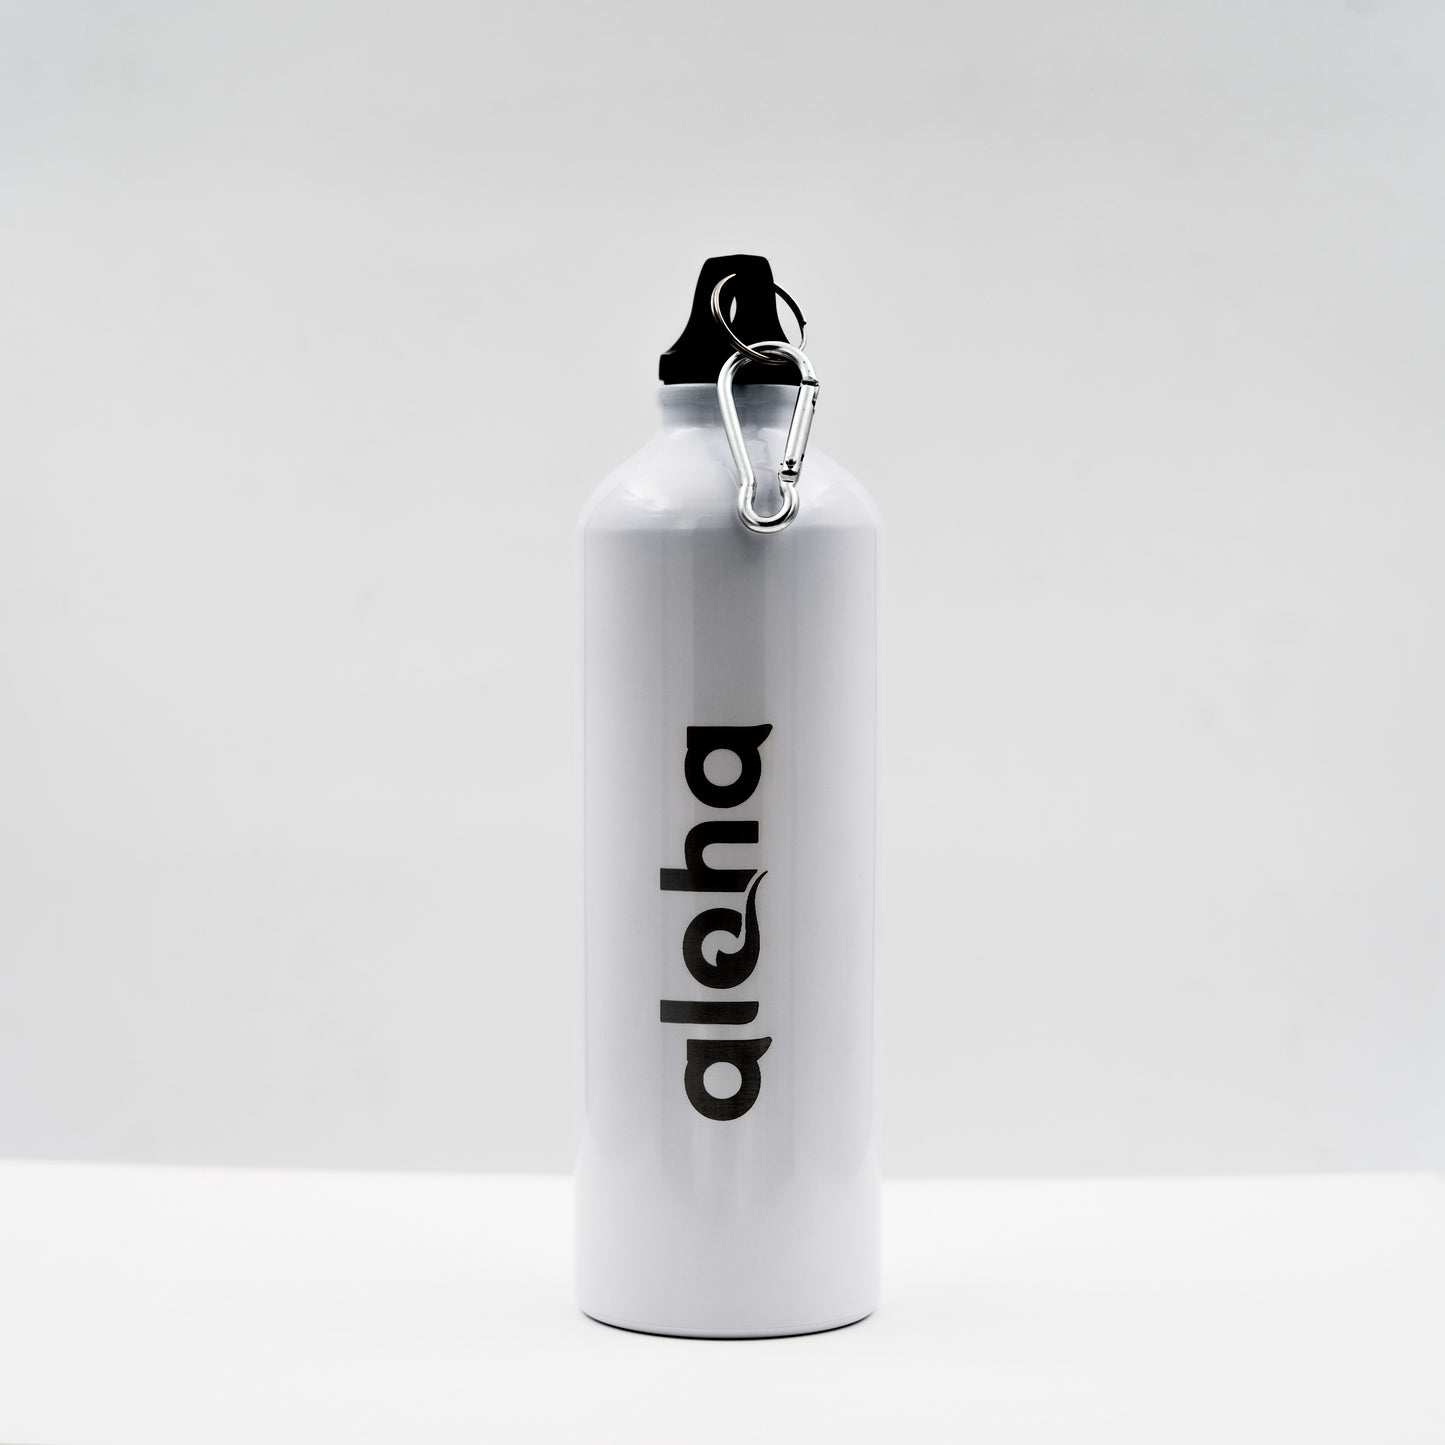 Aloha Water Bottle - Your Hydration Companion for Daily Adventures